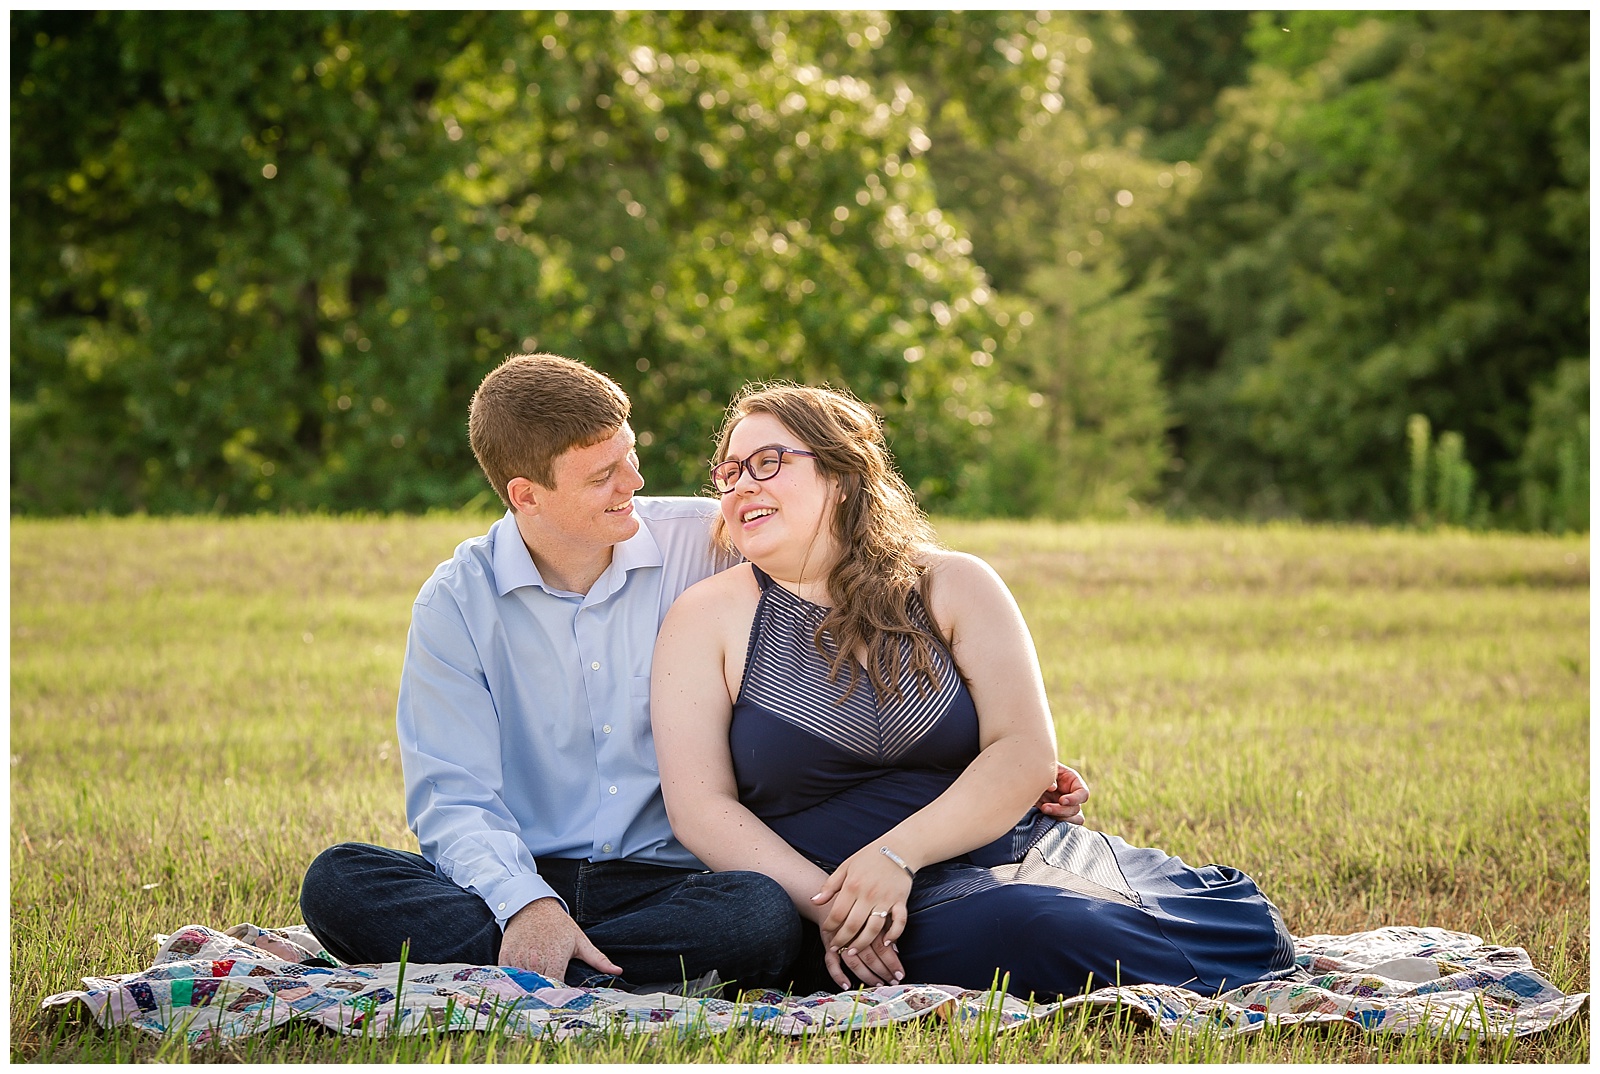 An engagement session at Cedar Crest (the governor's mansion) in Topeka, Kansas.